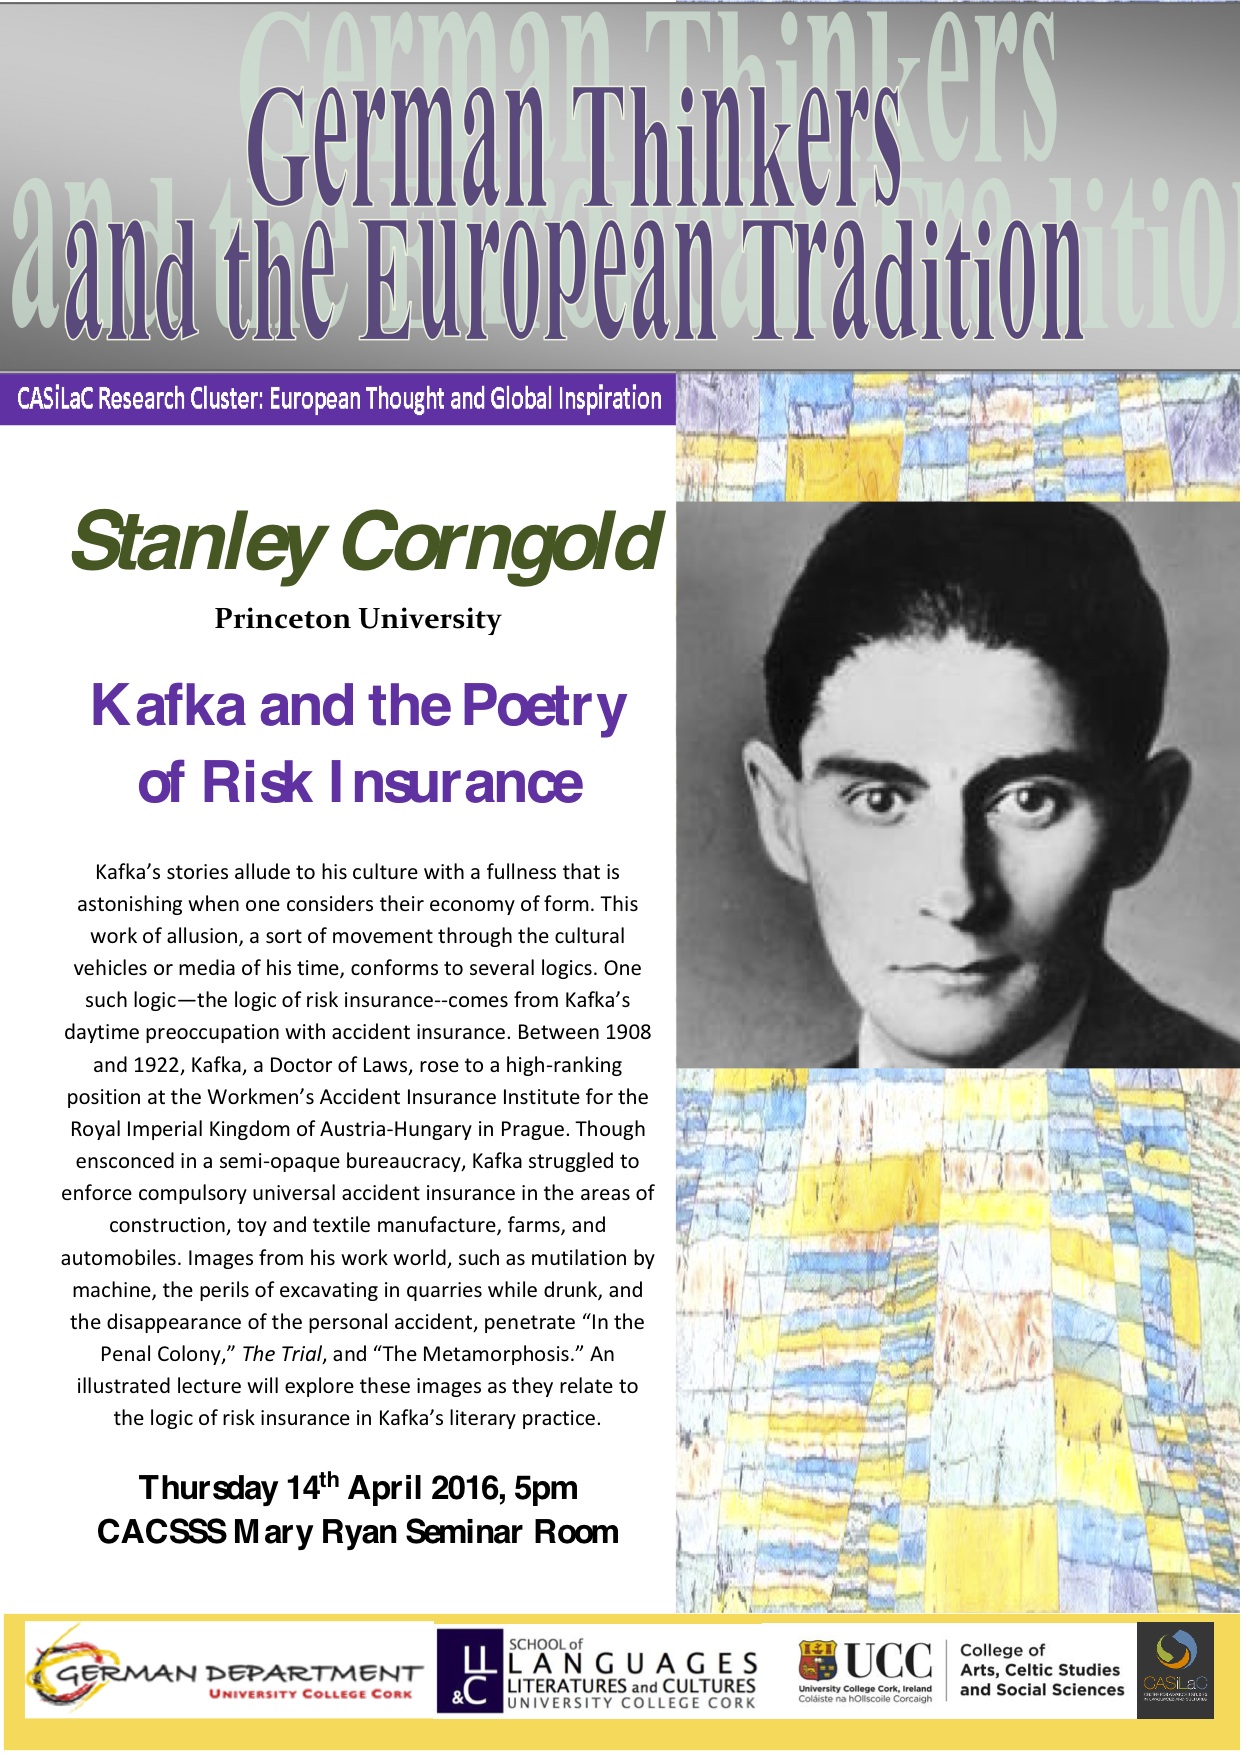 Prof Stanley Corngold (Princeton University) will give a lecture as part of the CASiLaC European Thought and Global Inspiration Cluster